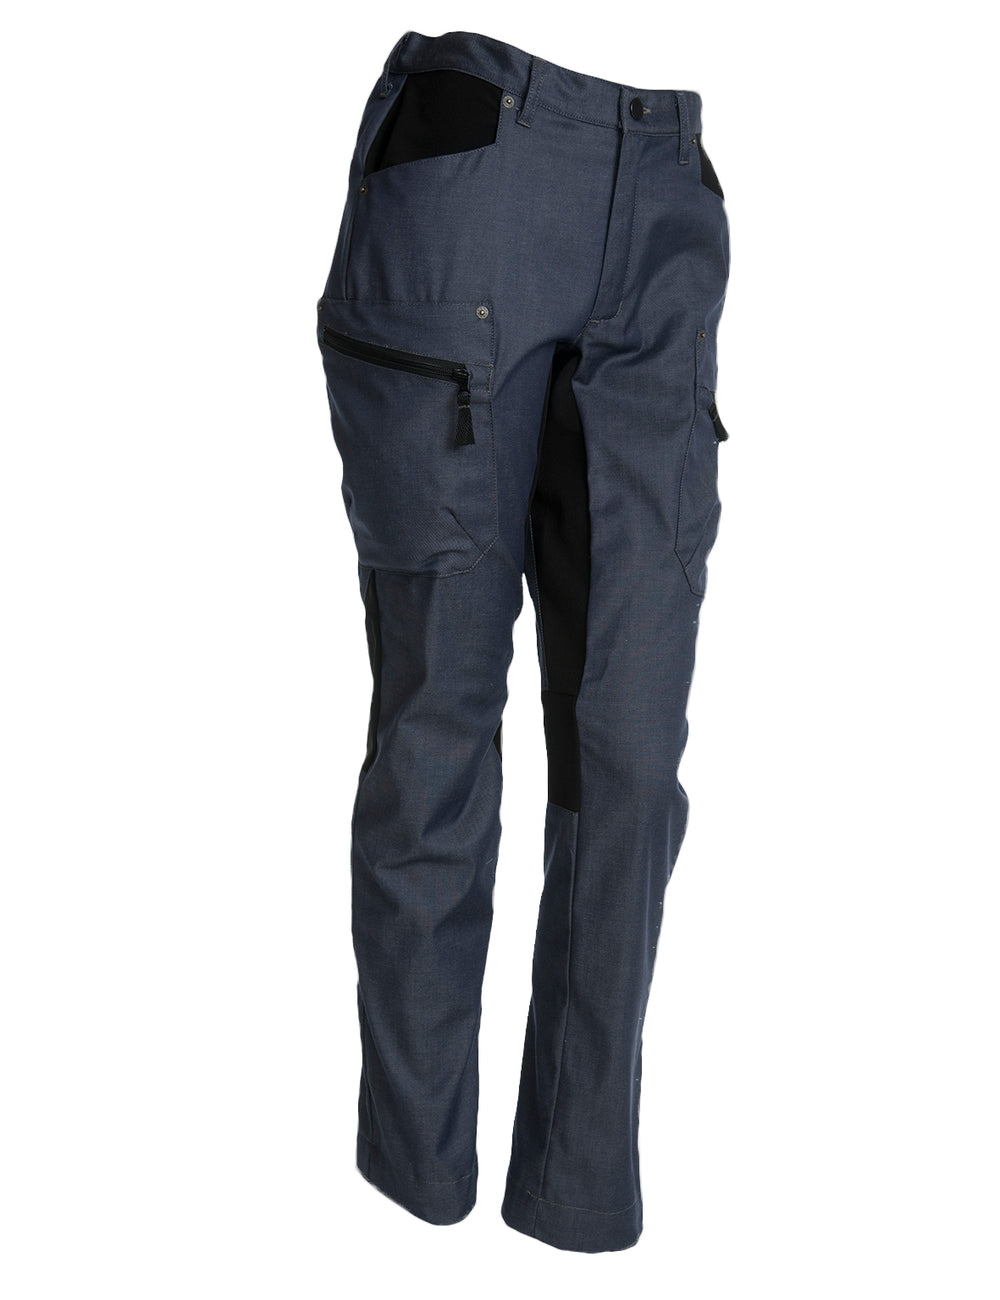 Women's trousers with thigh pockets